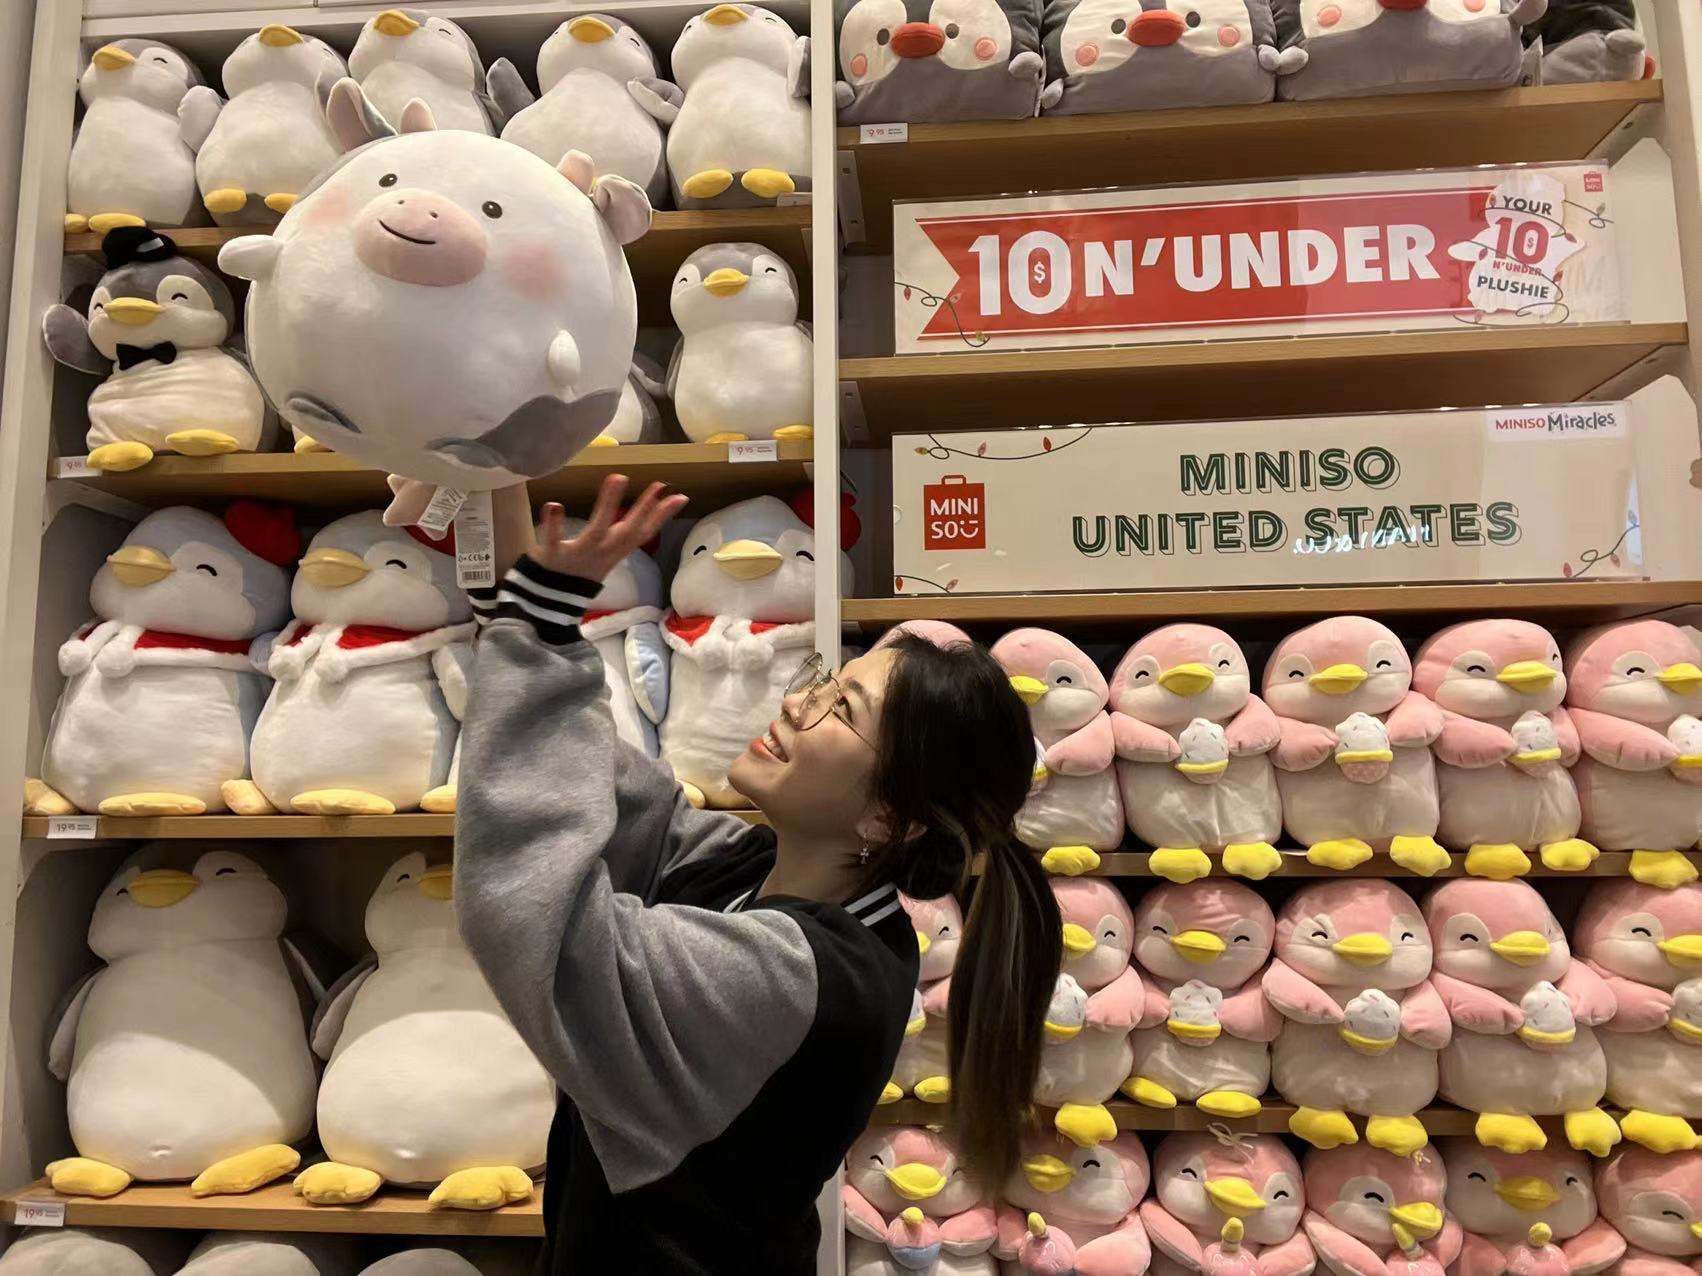 MINISO MIRACLES Shares Joy, Happiness and Fun Image